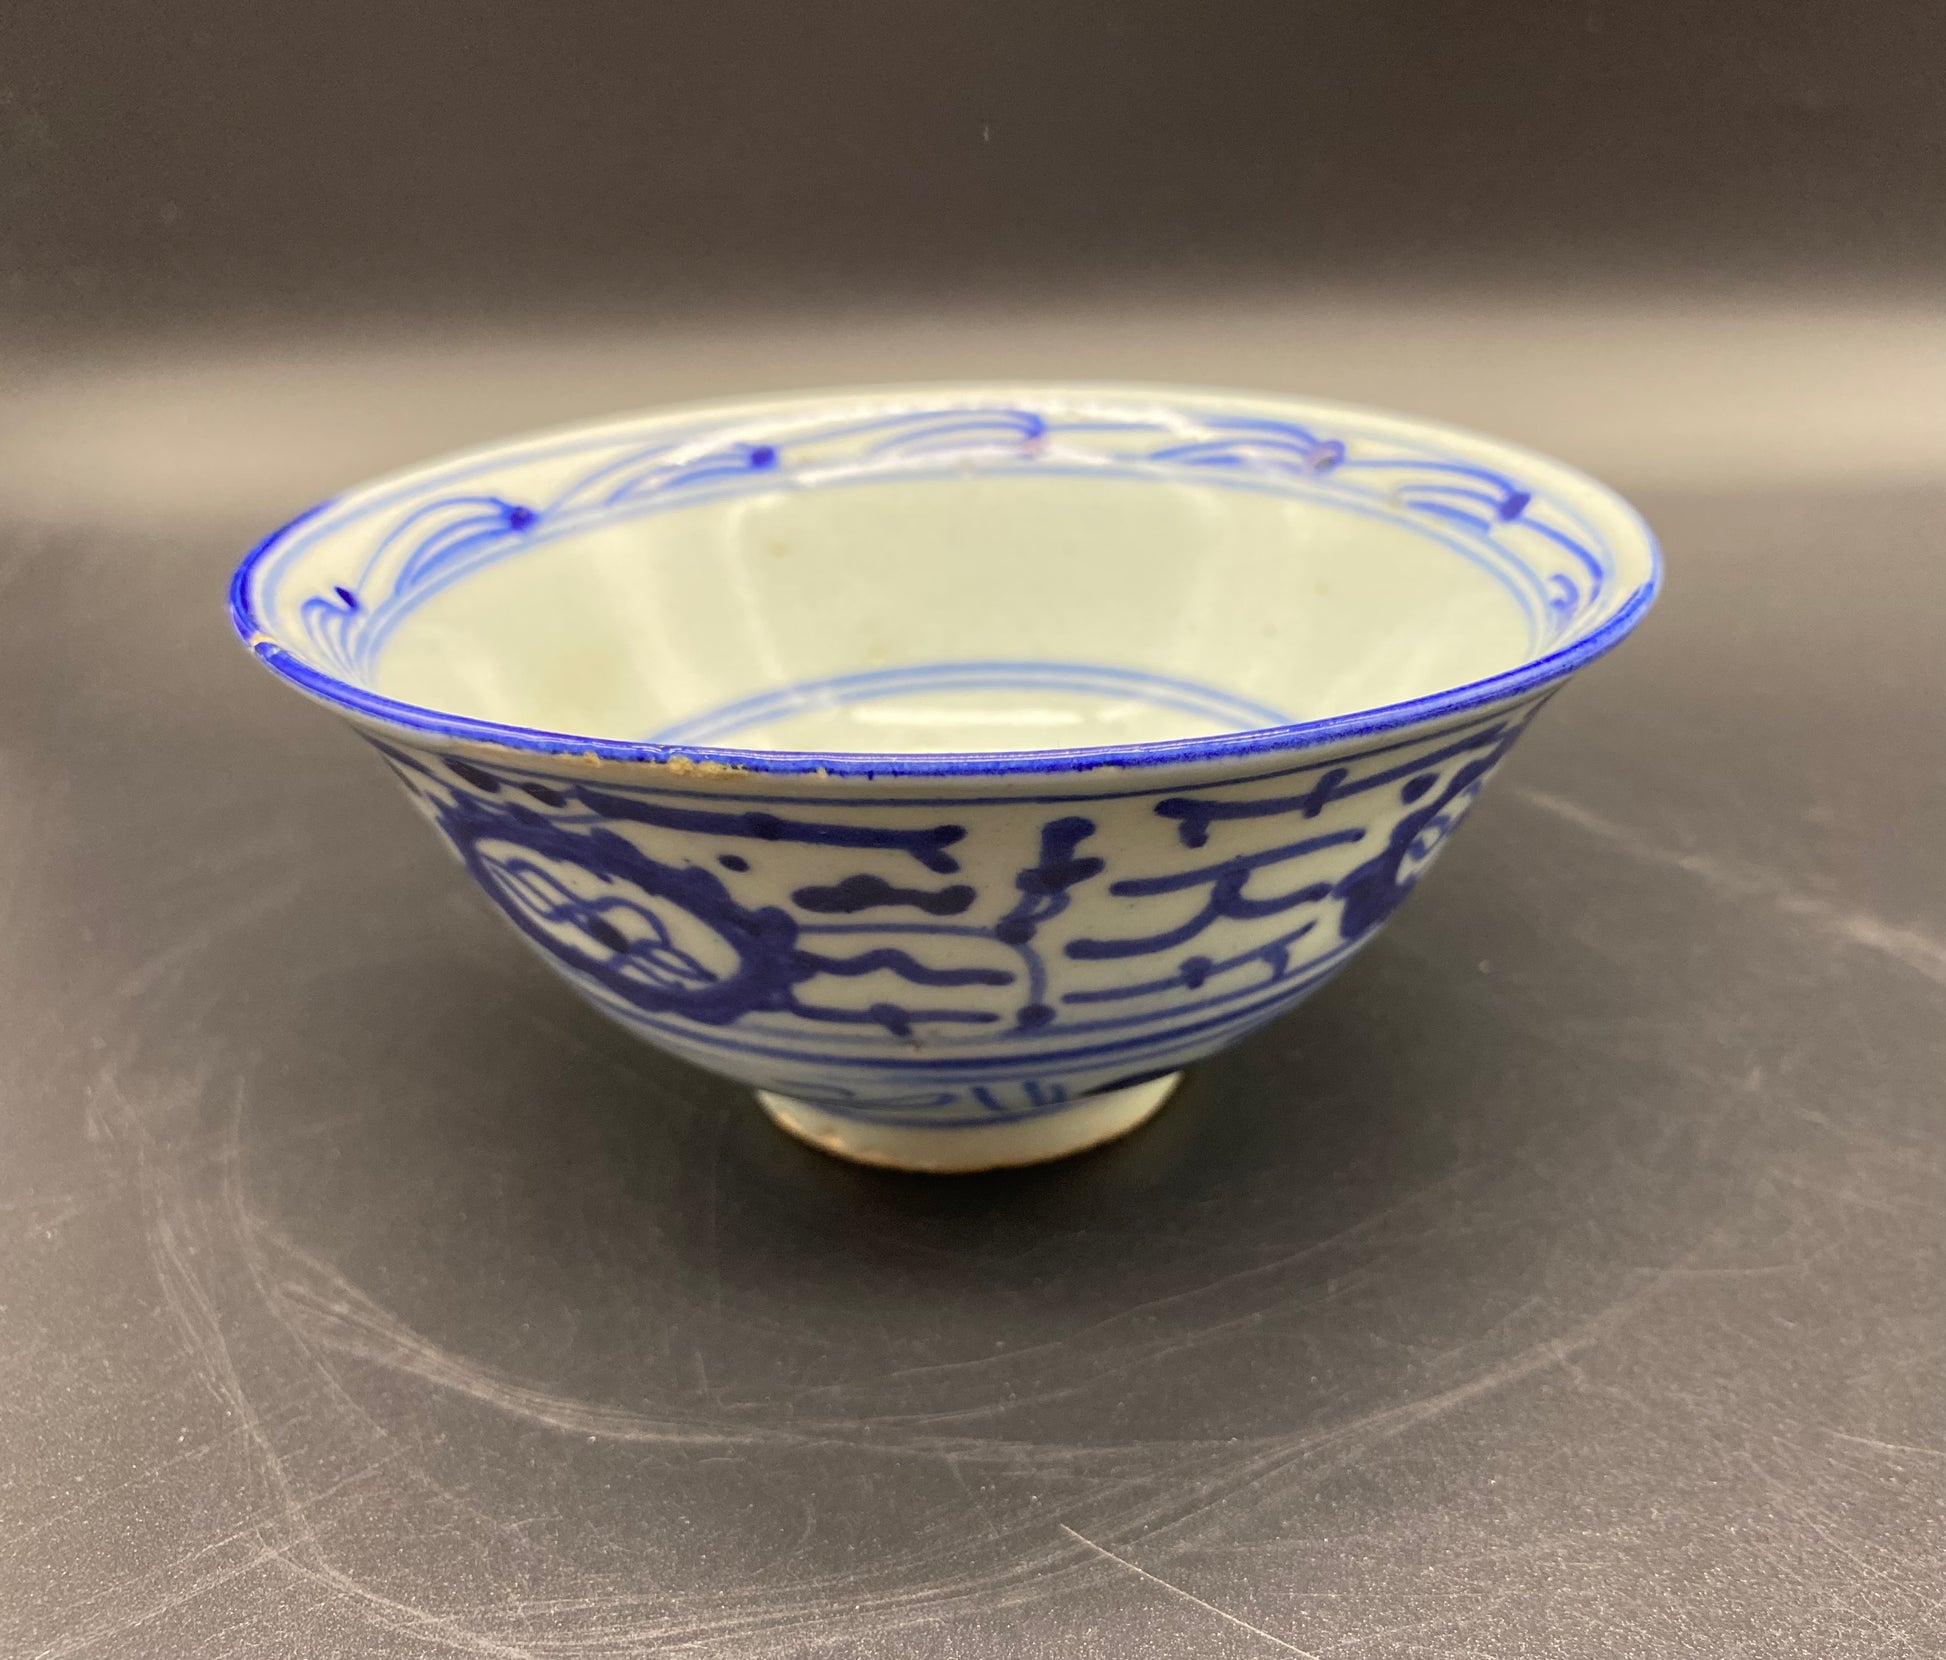 Buy Antiques Online - Chinese Provencal Blue & White Qing Porcelain Bowls 18th Century 